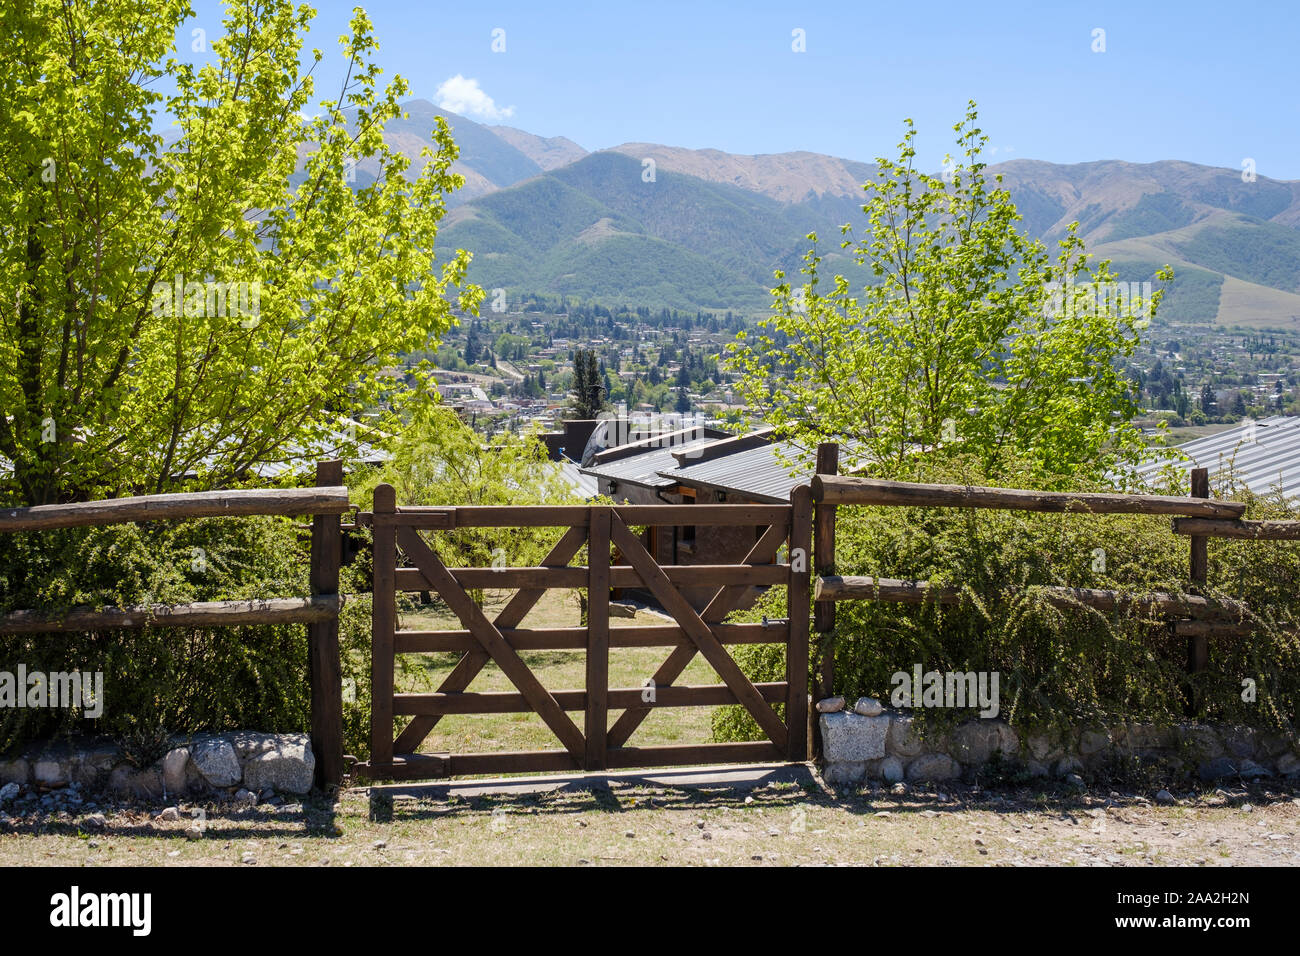 High standard properties in Tafí del Valle, Argentina Stock Photo